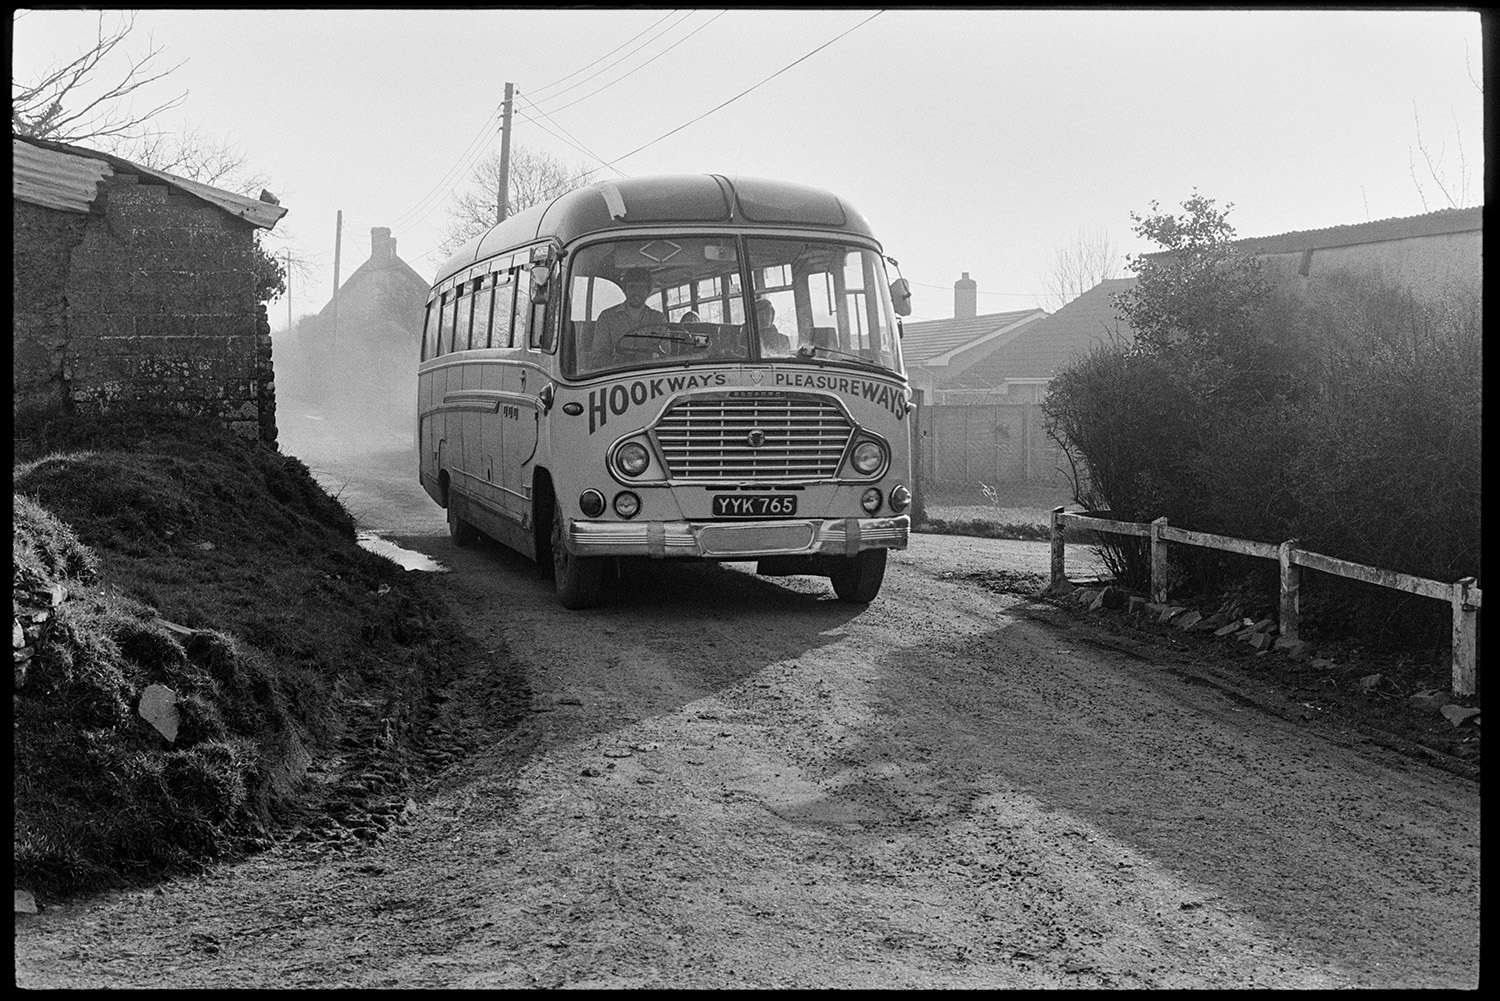 School bus arriving in village children waiting, morning. 
[A Hookways school bus driving along a road in Upcott, Dolton to pick up children  and take them to school.]